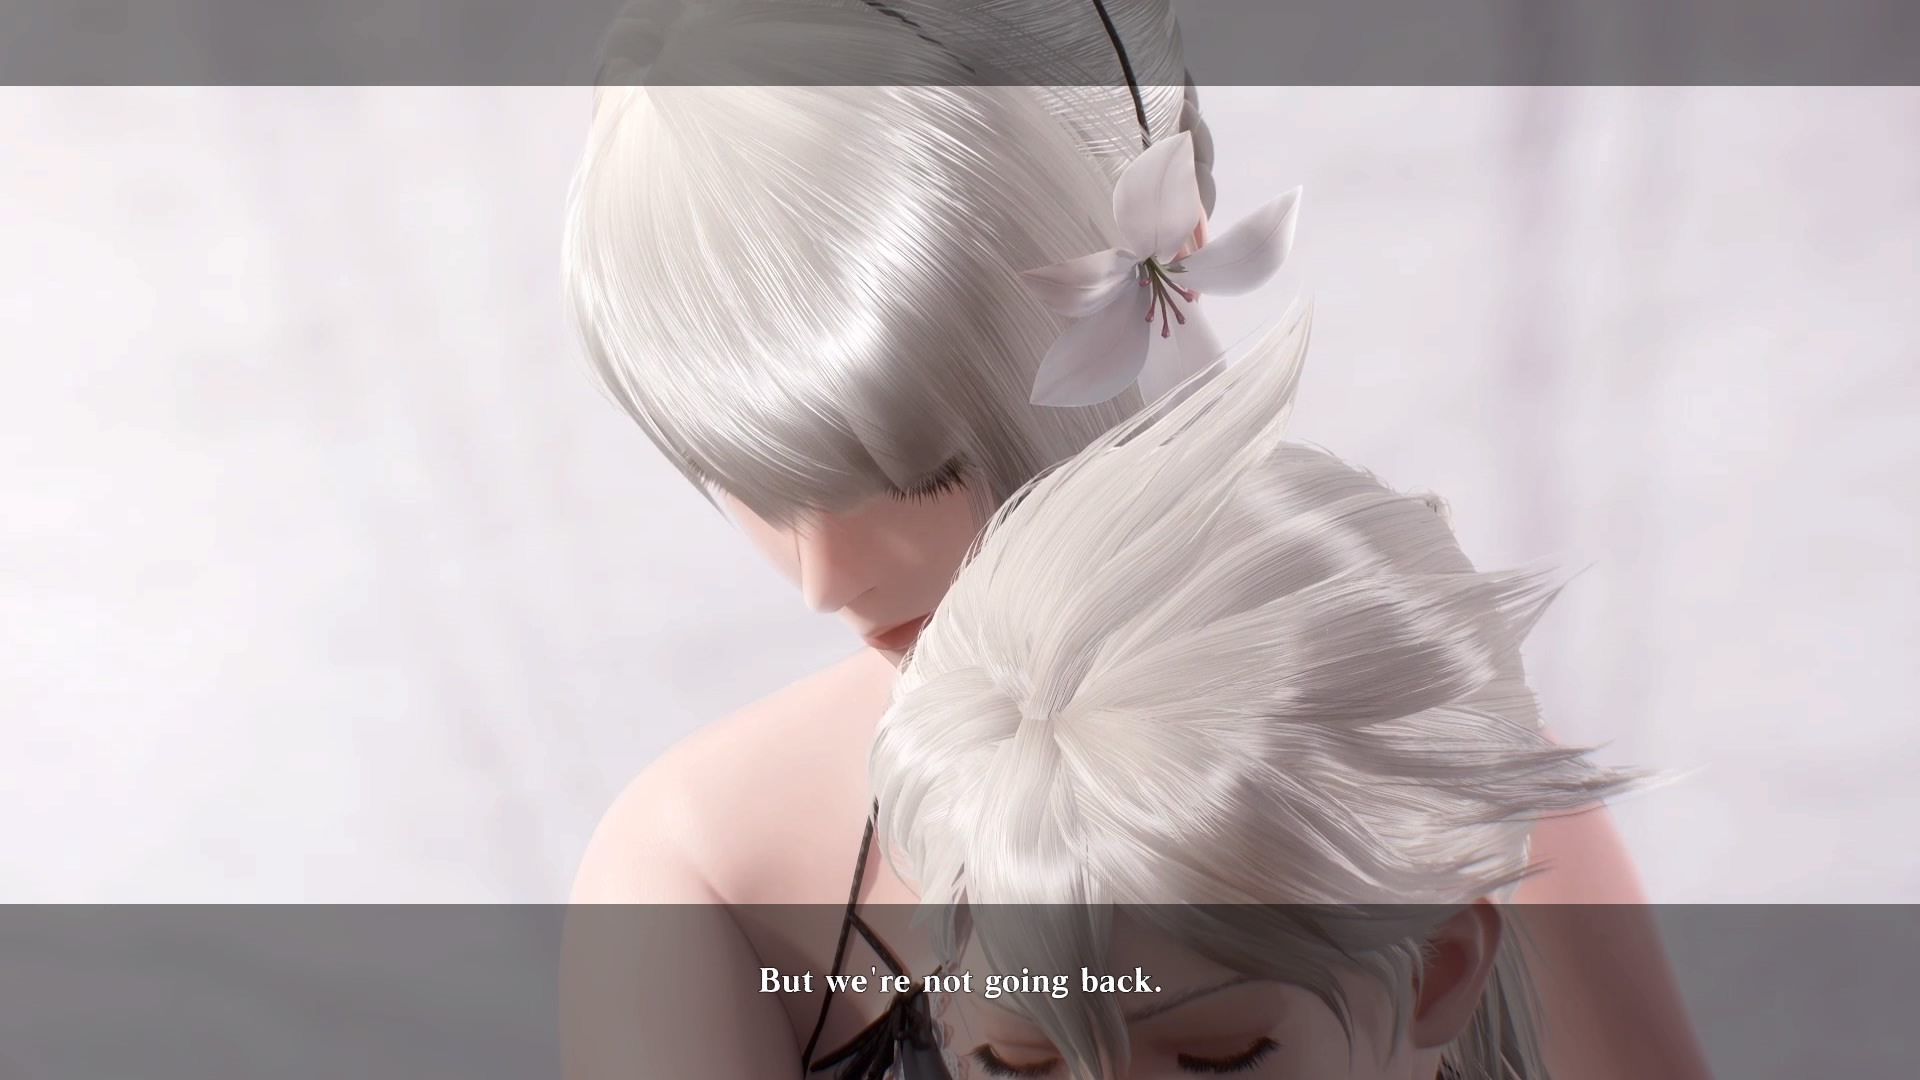 Kaine hugging Nier's shoulders and saying "but we're not going back"